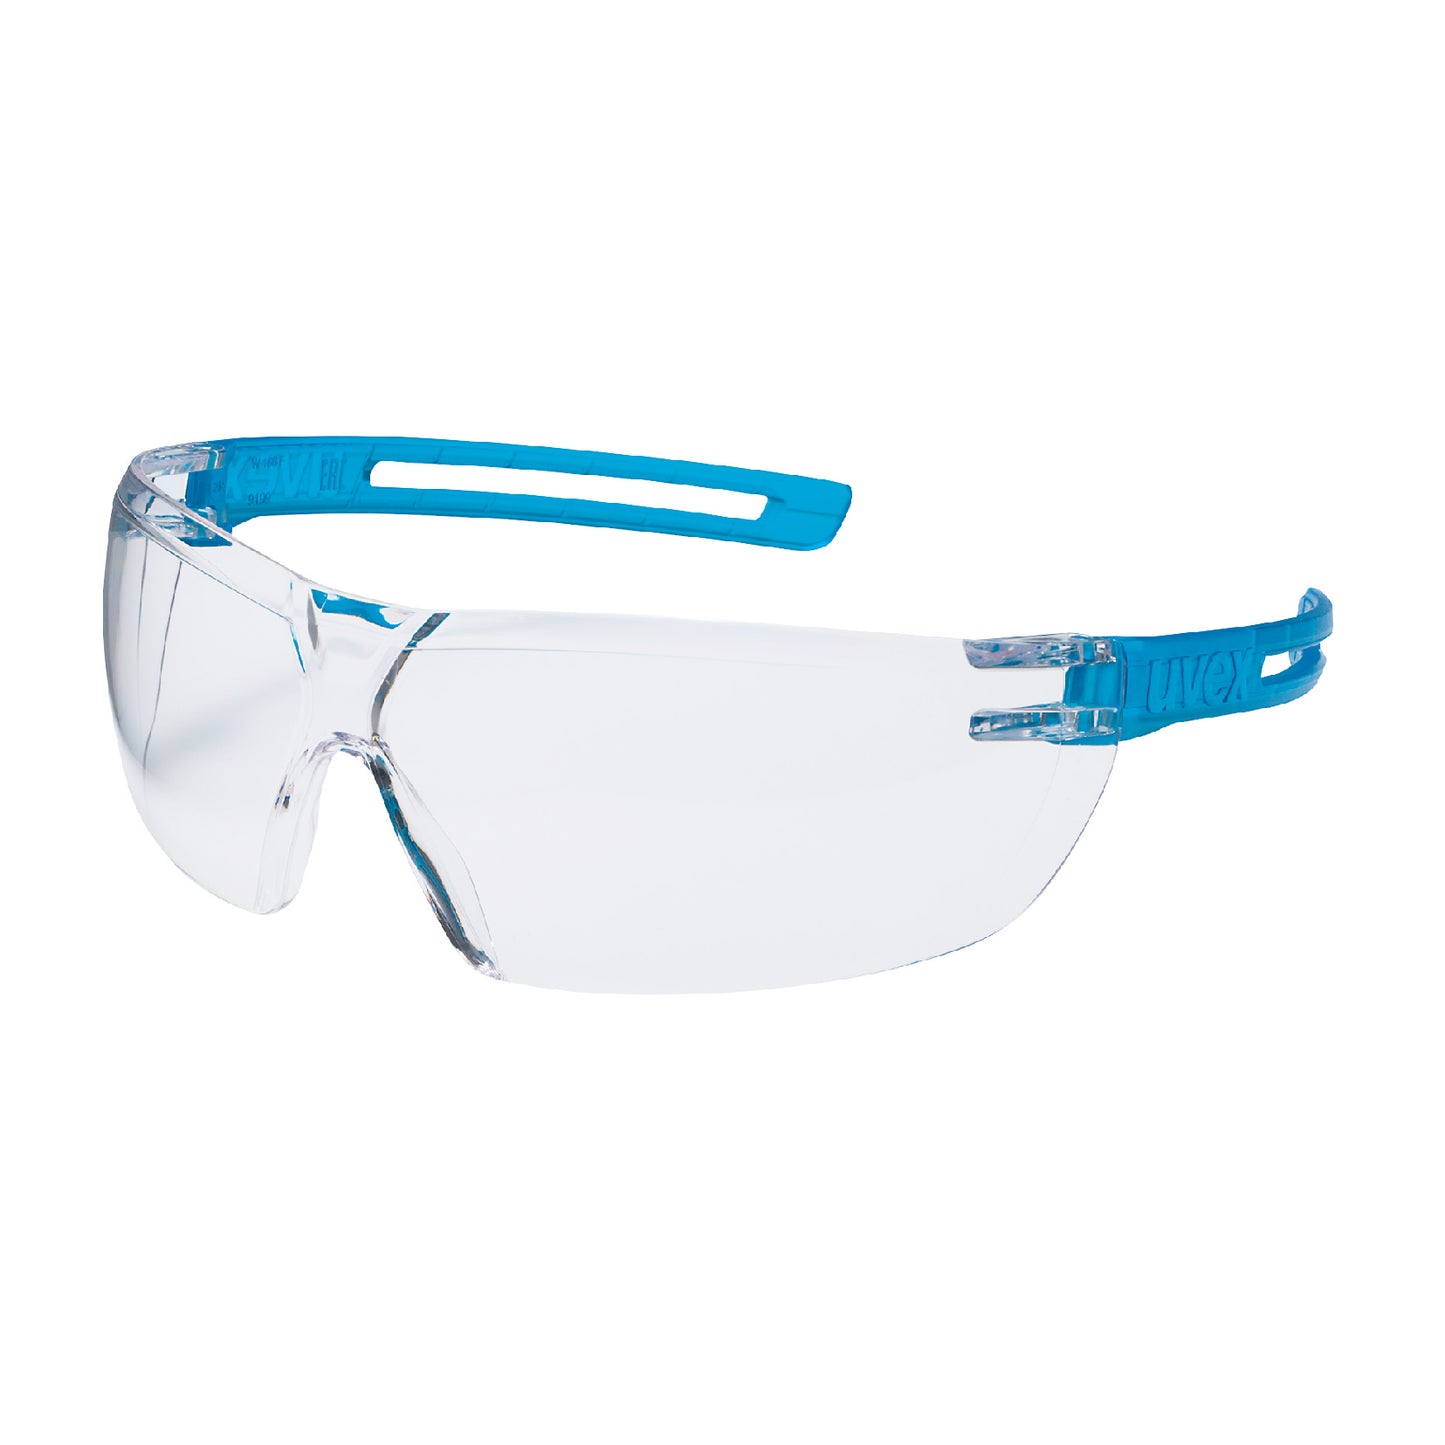 uvex x-fit Safety Glasses. The uvex x-fit brings up just 23 grams onto the scale. The sporty protective glasses impress with optimal eye space coverage and best wearing comfort. The X-design of the lens and the translucent bracket make the uvex x-fit a highlight. protexU